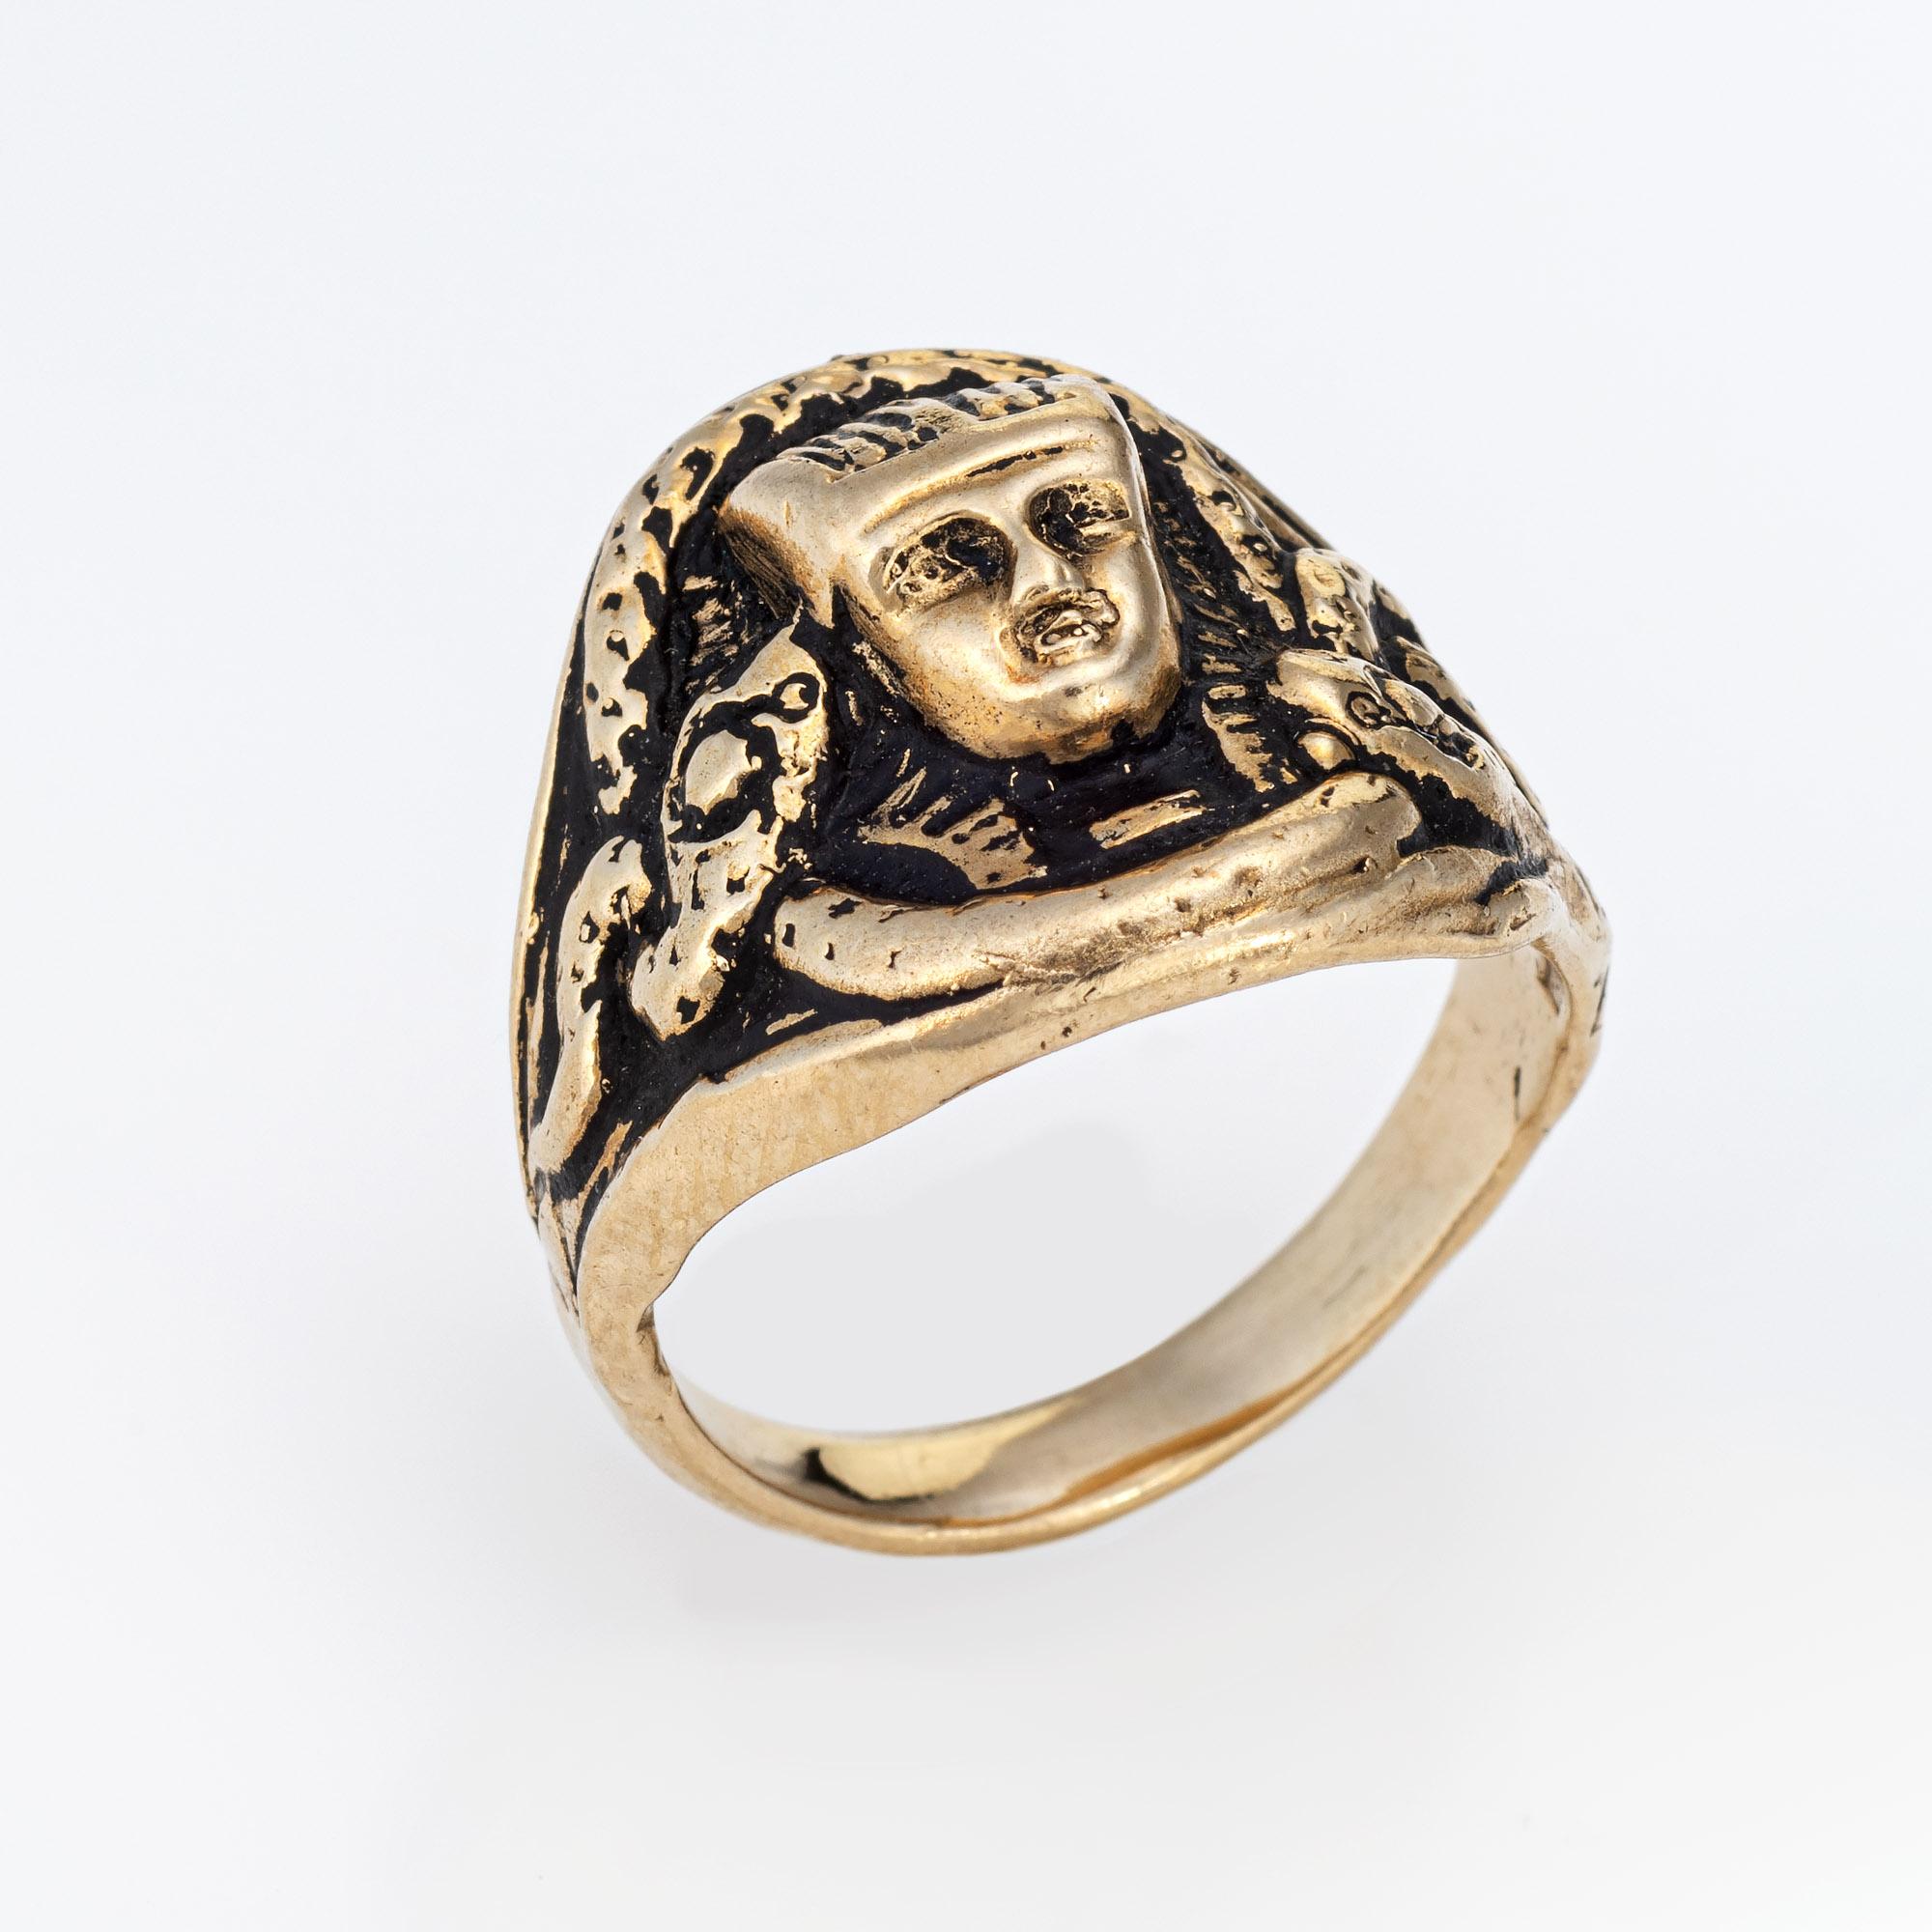 Stylish vintage Egyptian Pharaoh signet ring (circa 1960s to 1970s) crafted in 14 karat yellow gold. 

The nicely detailed ring highlights the mystique of ancient Egypt. The ring is designed to pay homage to the enigmatic Pharaohs who once ruled the